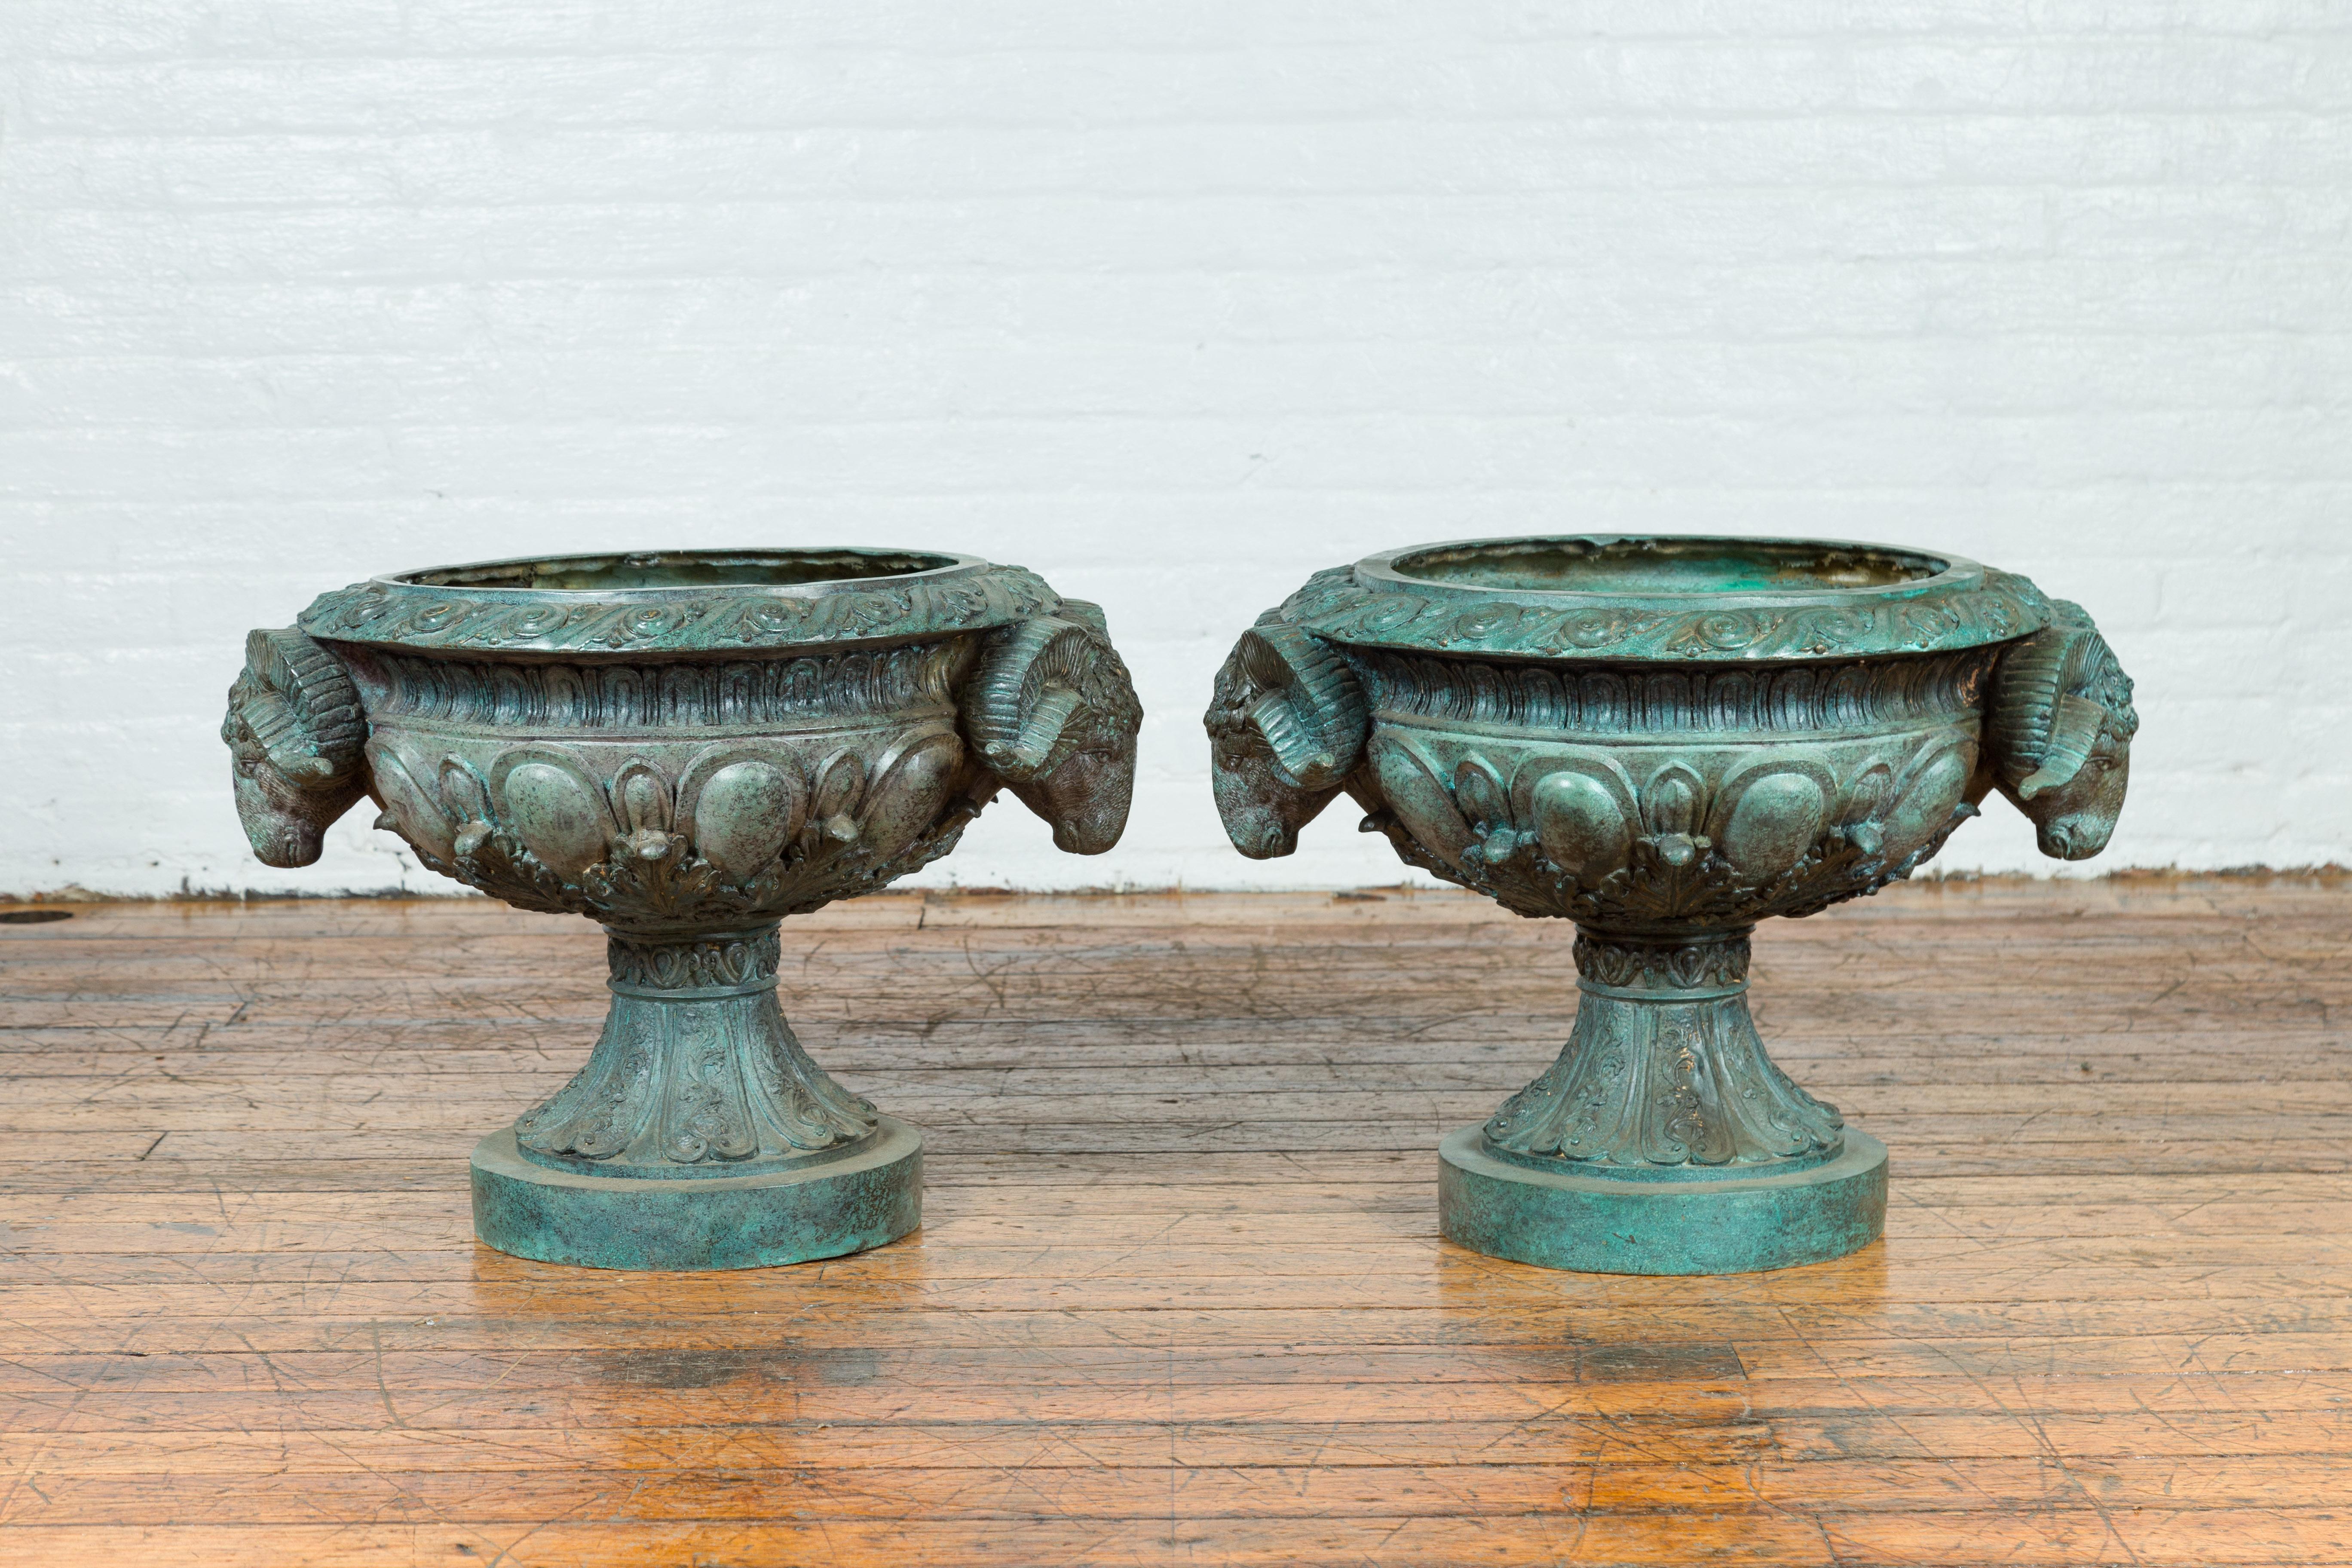 Two vintage Greco Roman style bronze urns from the late 20th century, with rams' heads and verde patina, priced and sold individually $2,800 each. Created with the traditional technique of the lost-wax (à la cire perdue) that allows a great